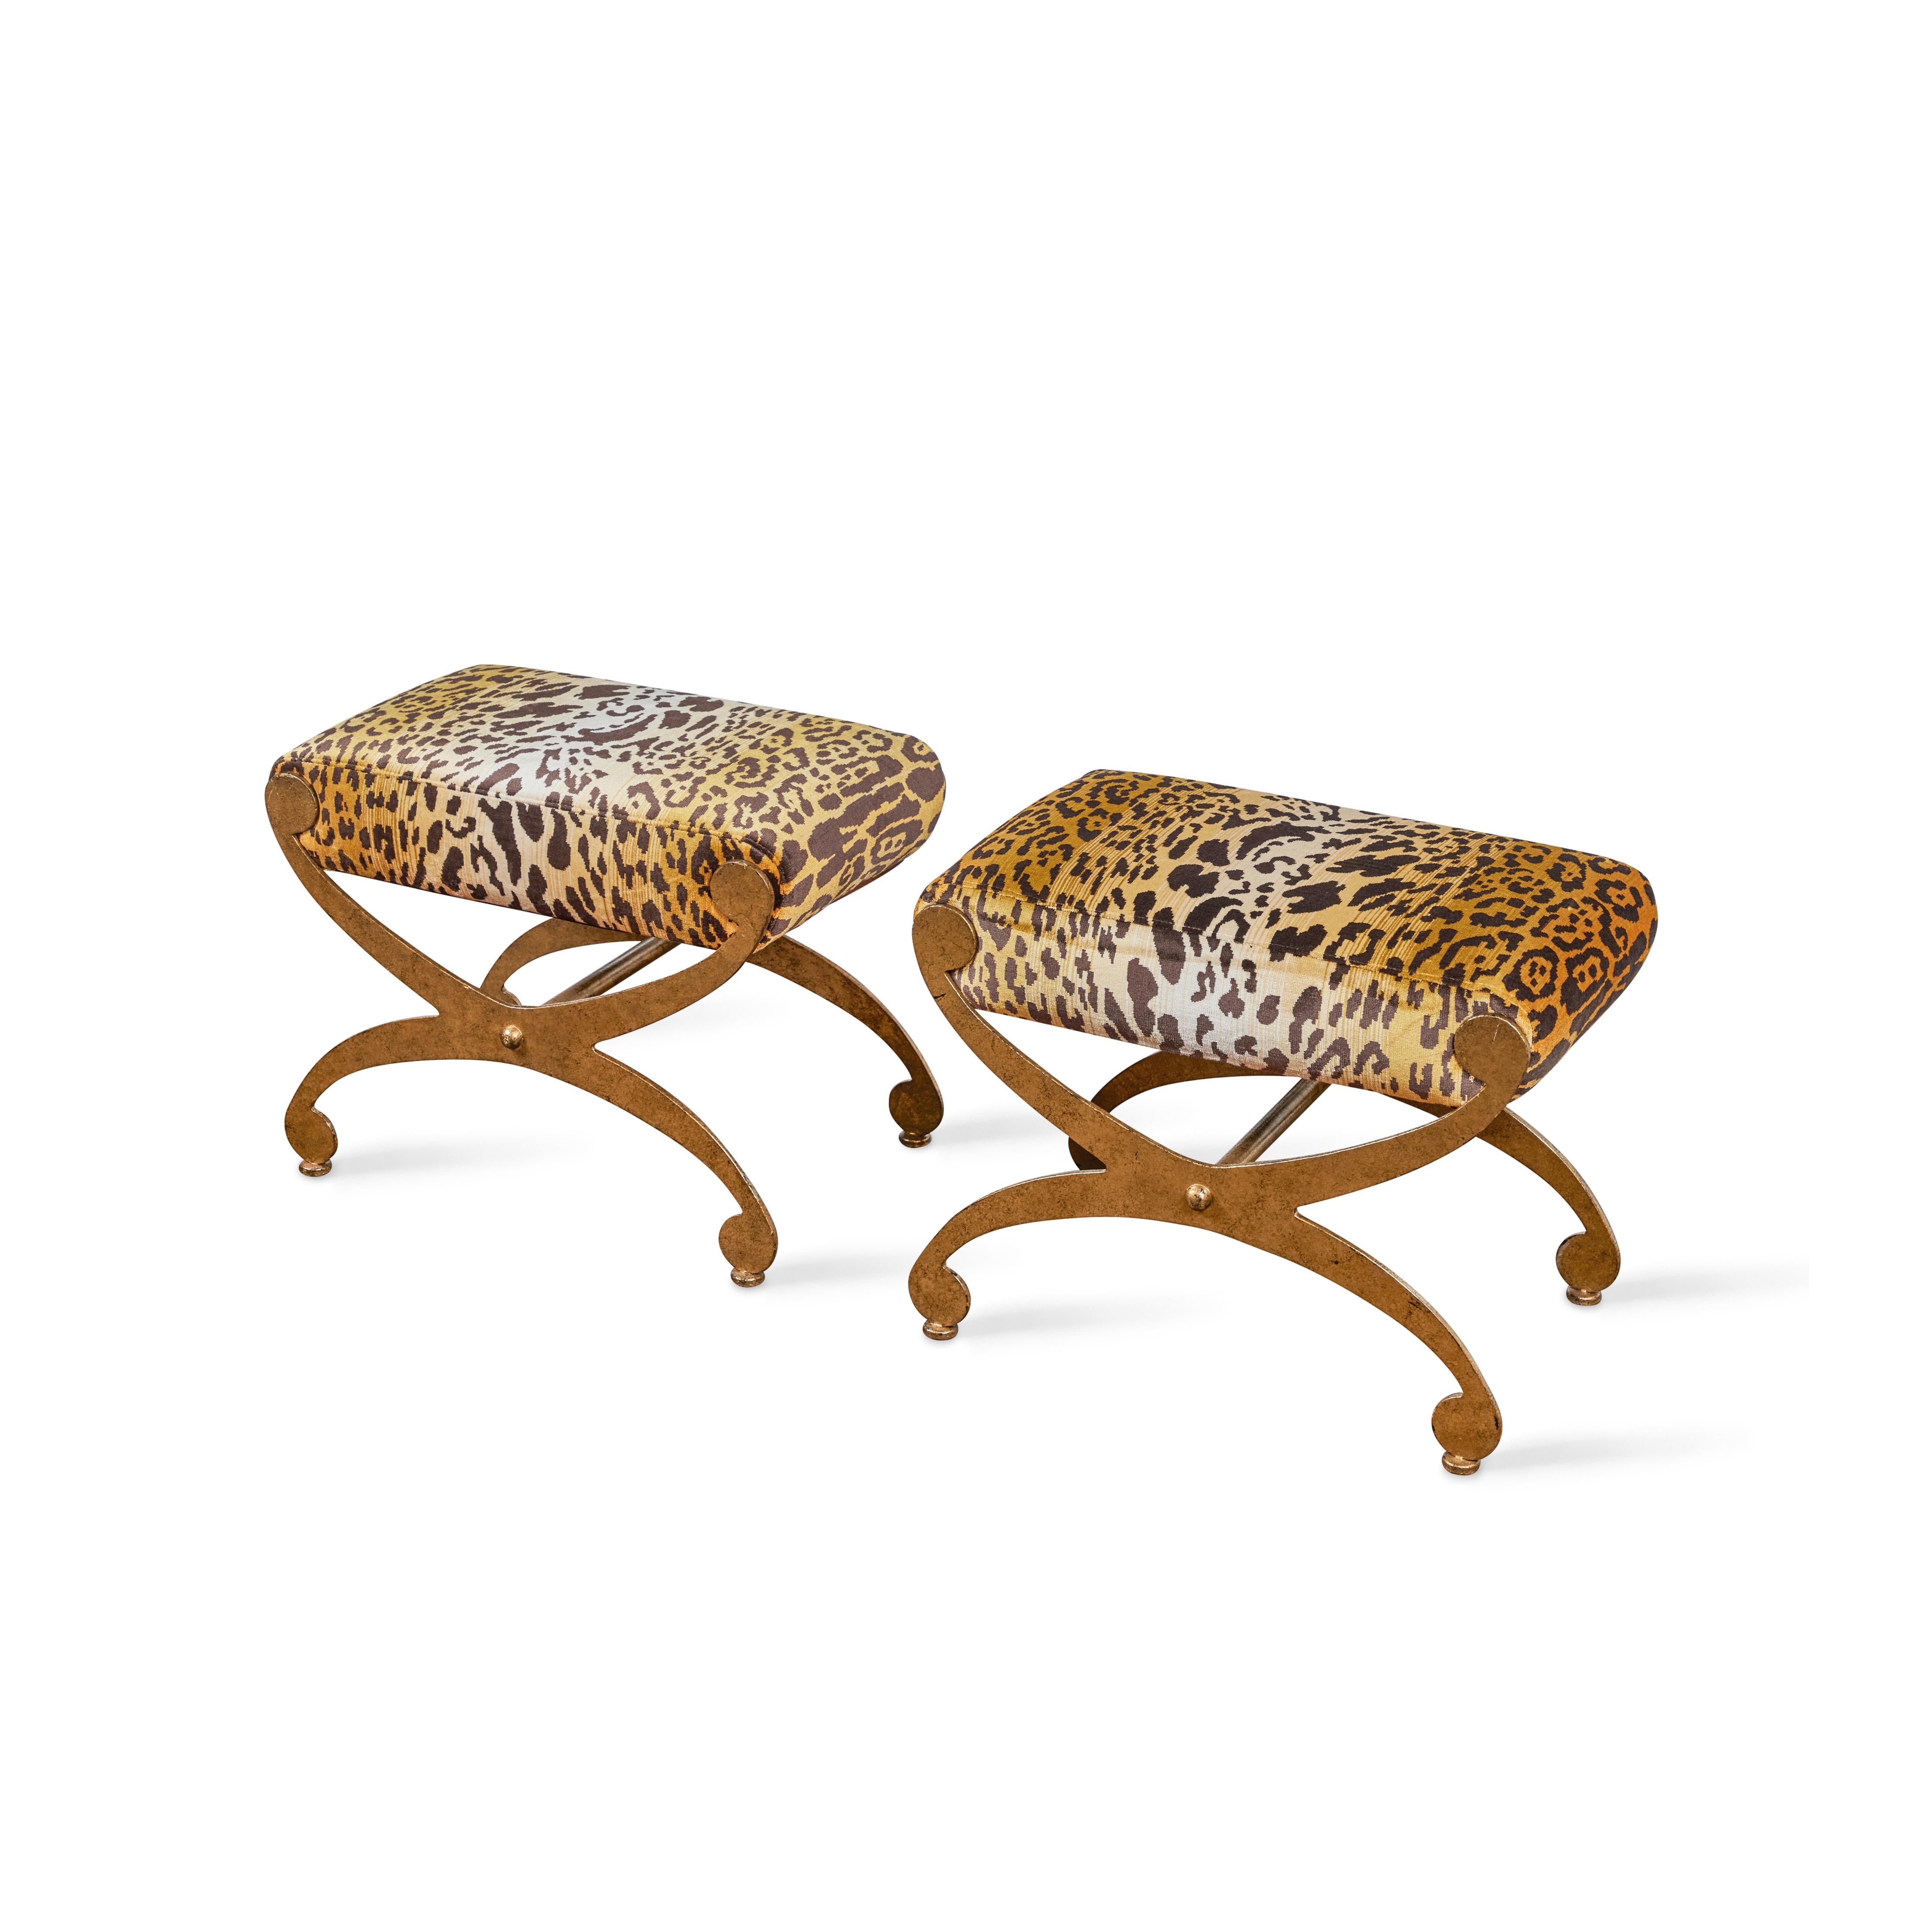 Pair of Italian Gilt Metal and Leopard Benches For Sale 2